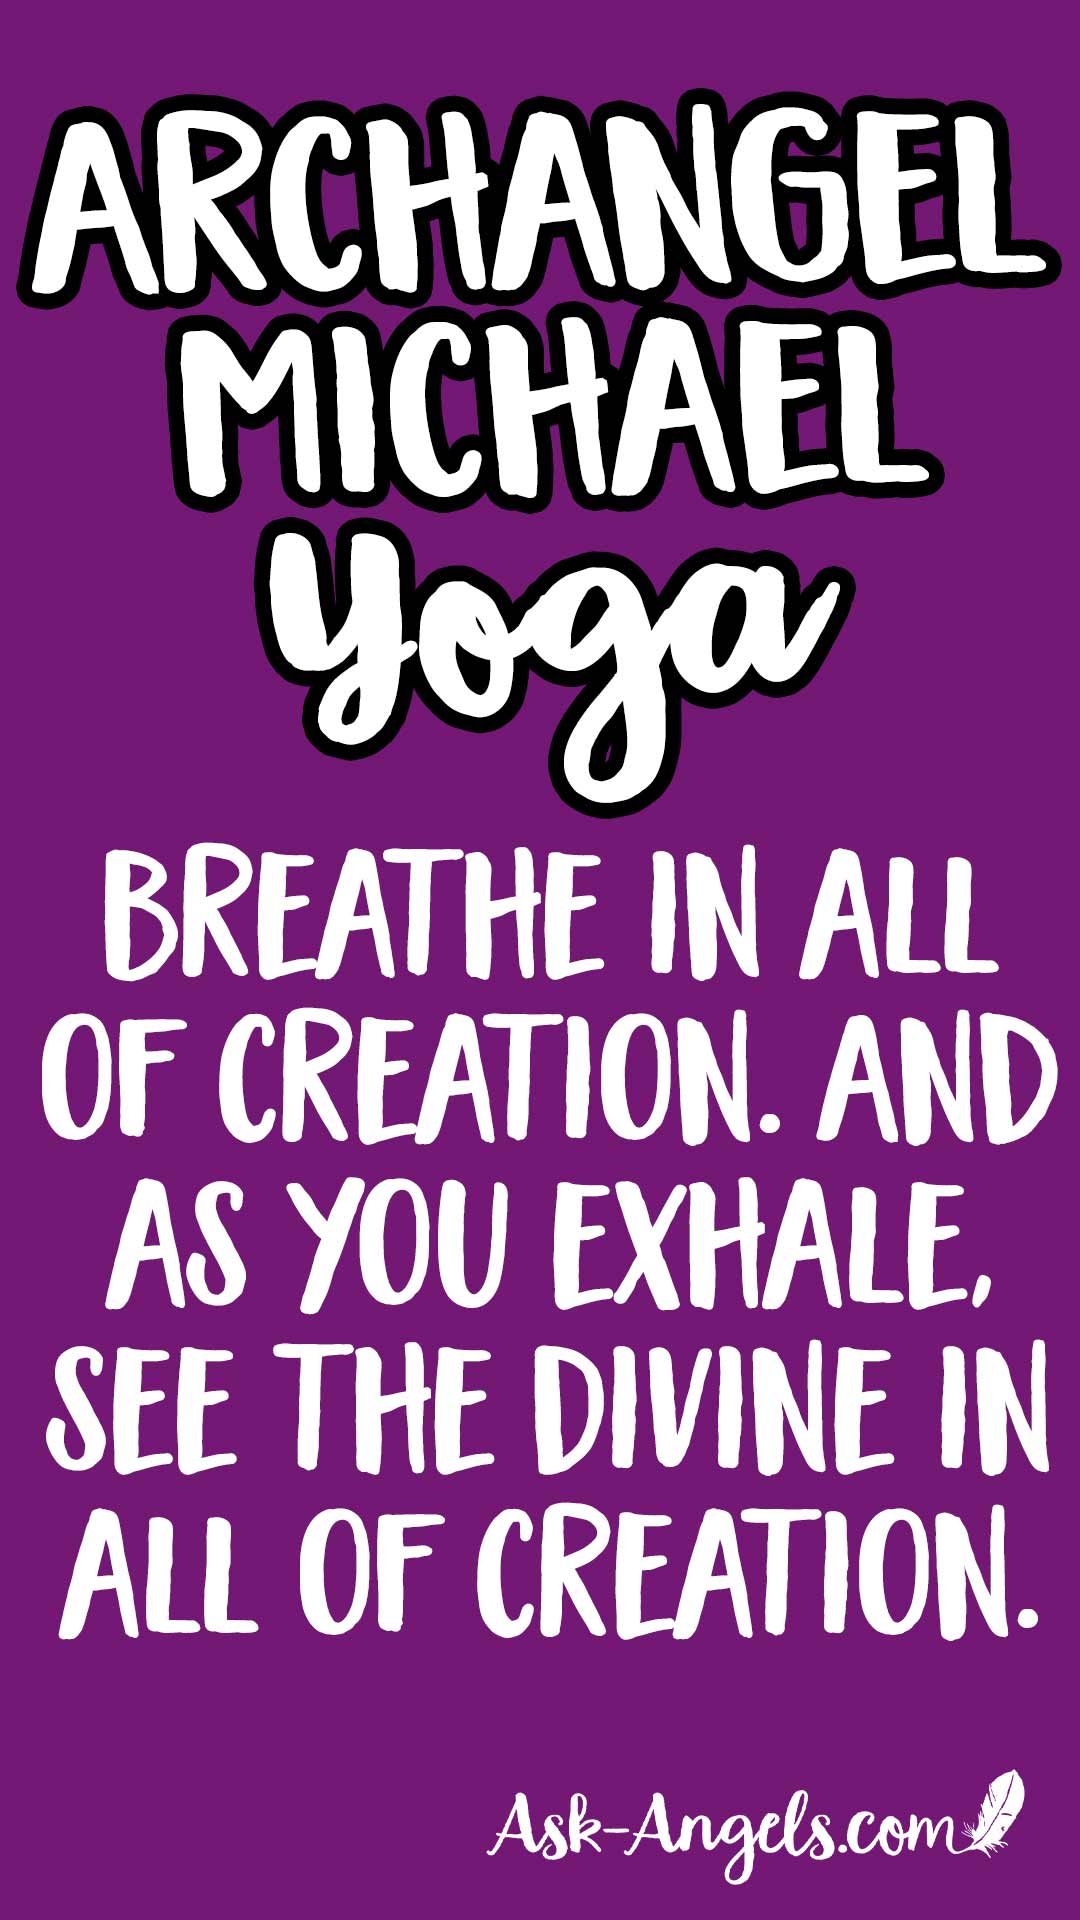 Archangel Michael Yoga- Breathe in all of creation and as you exhale see the Divine in all of Creation.